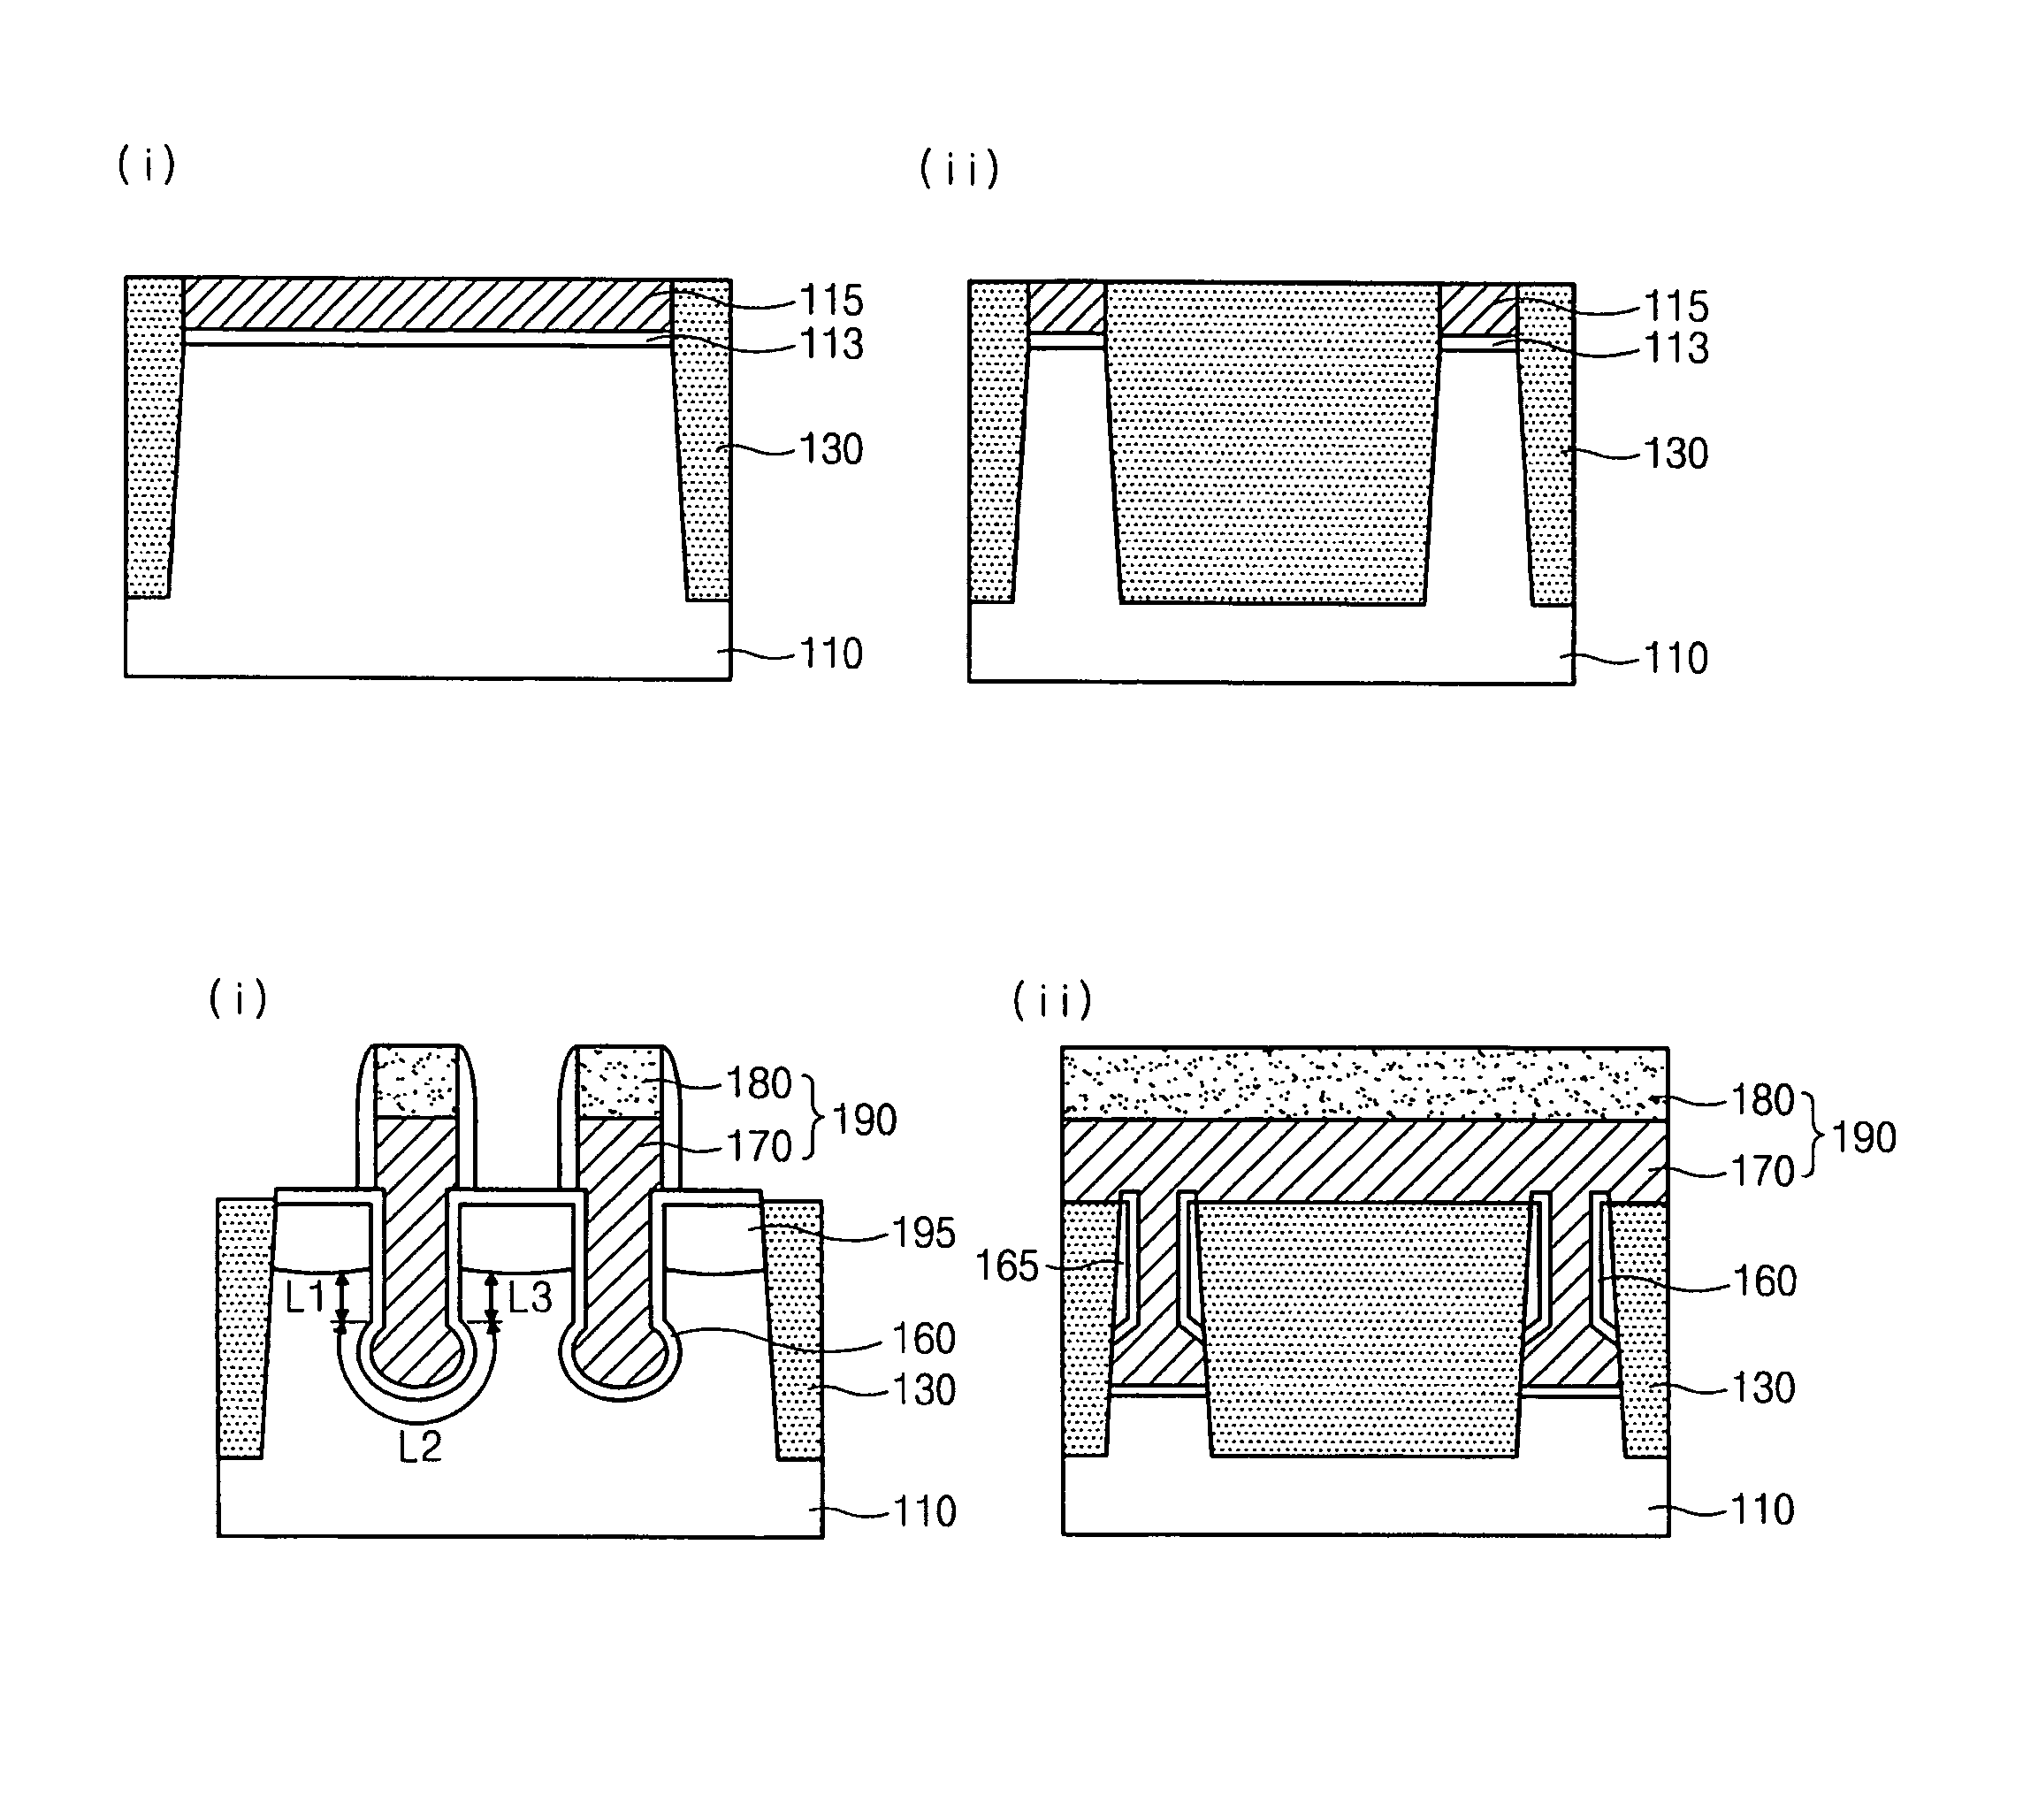 Semiconductor device with increased channel area and decreased leakage current